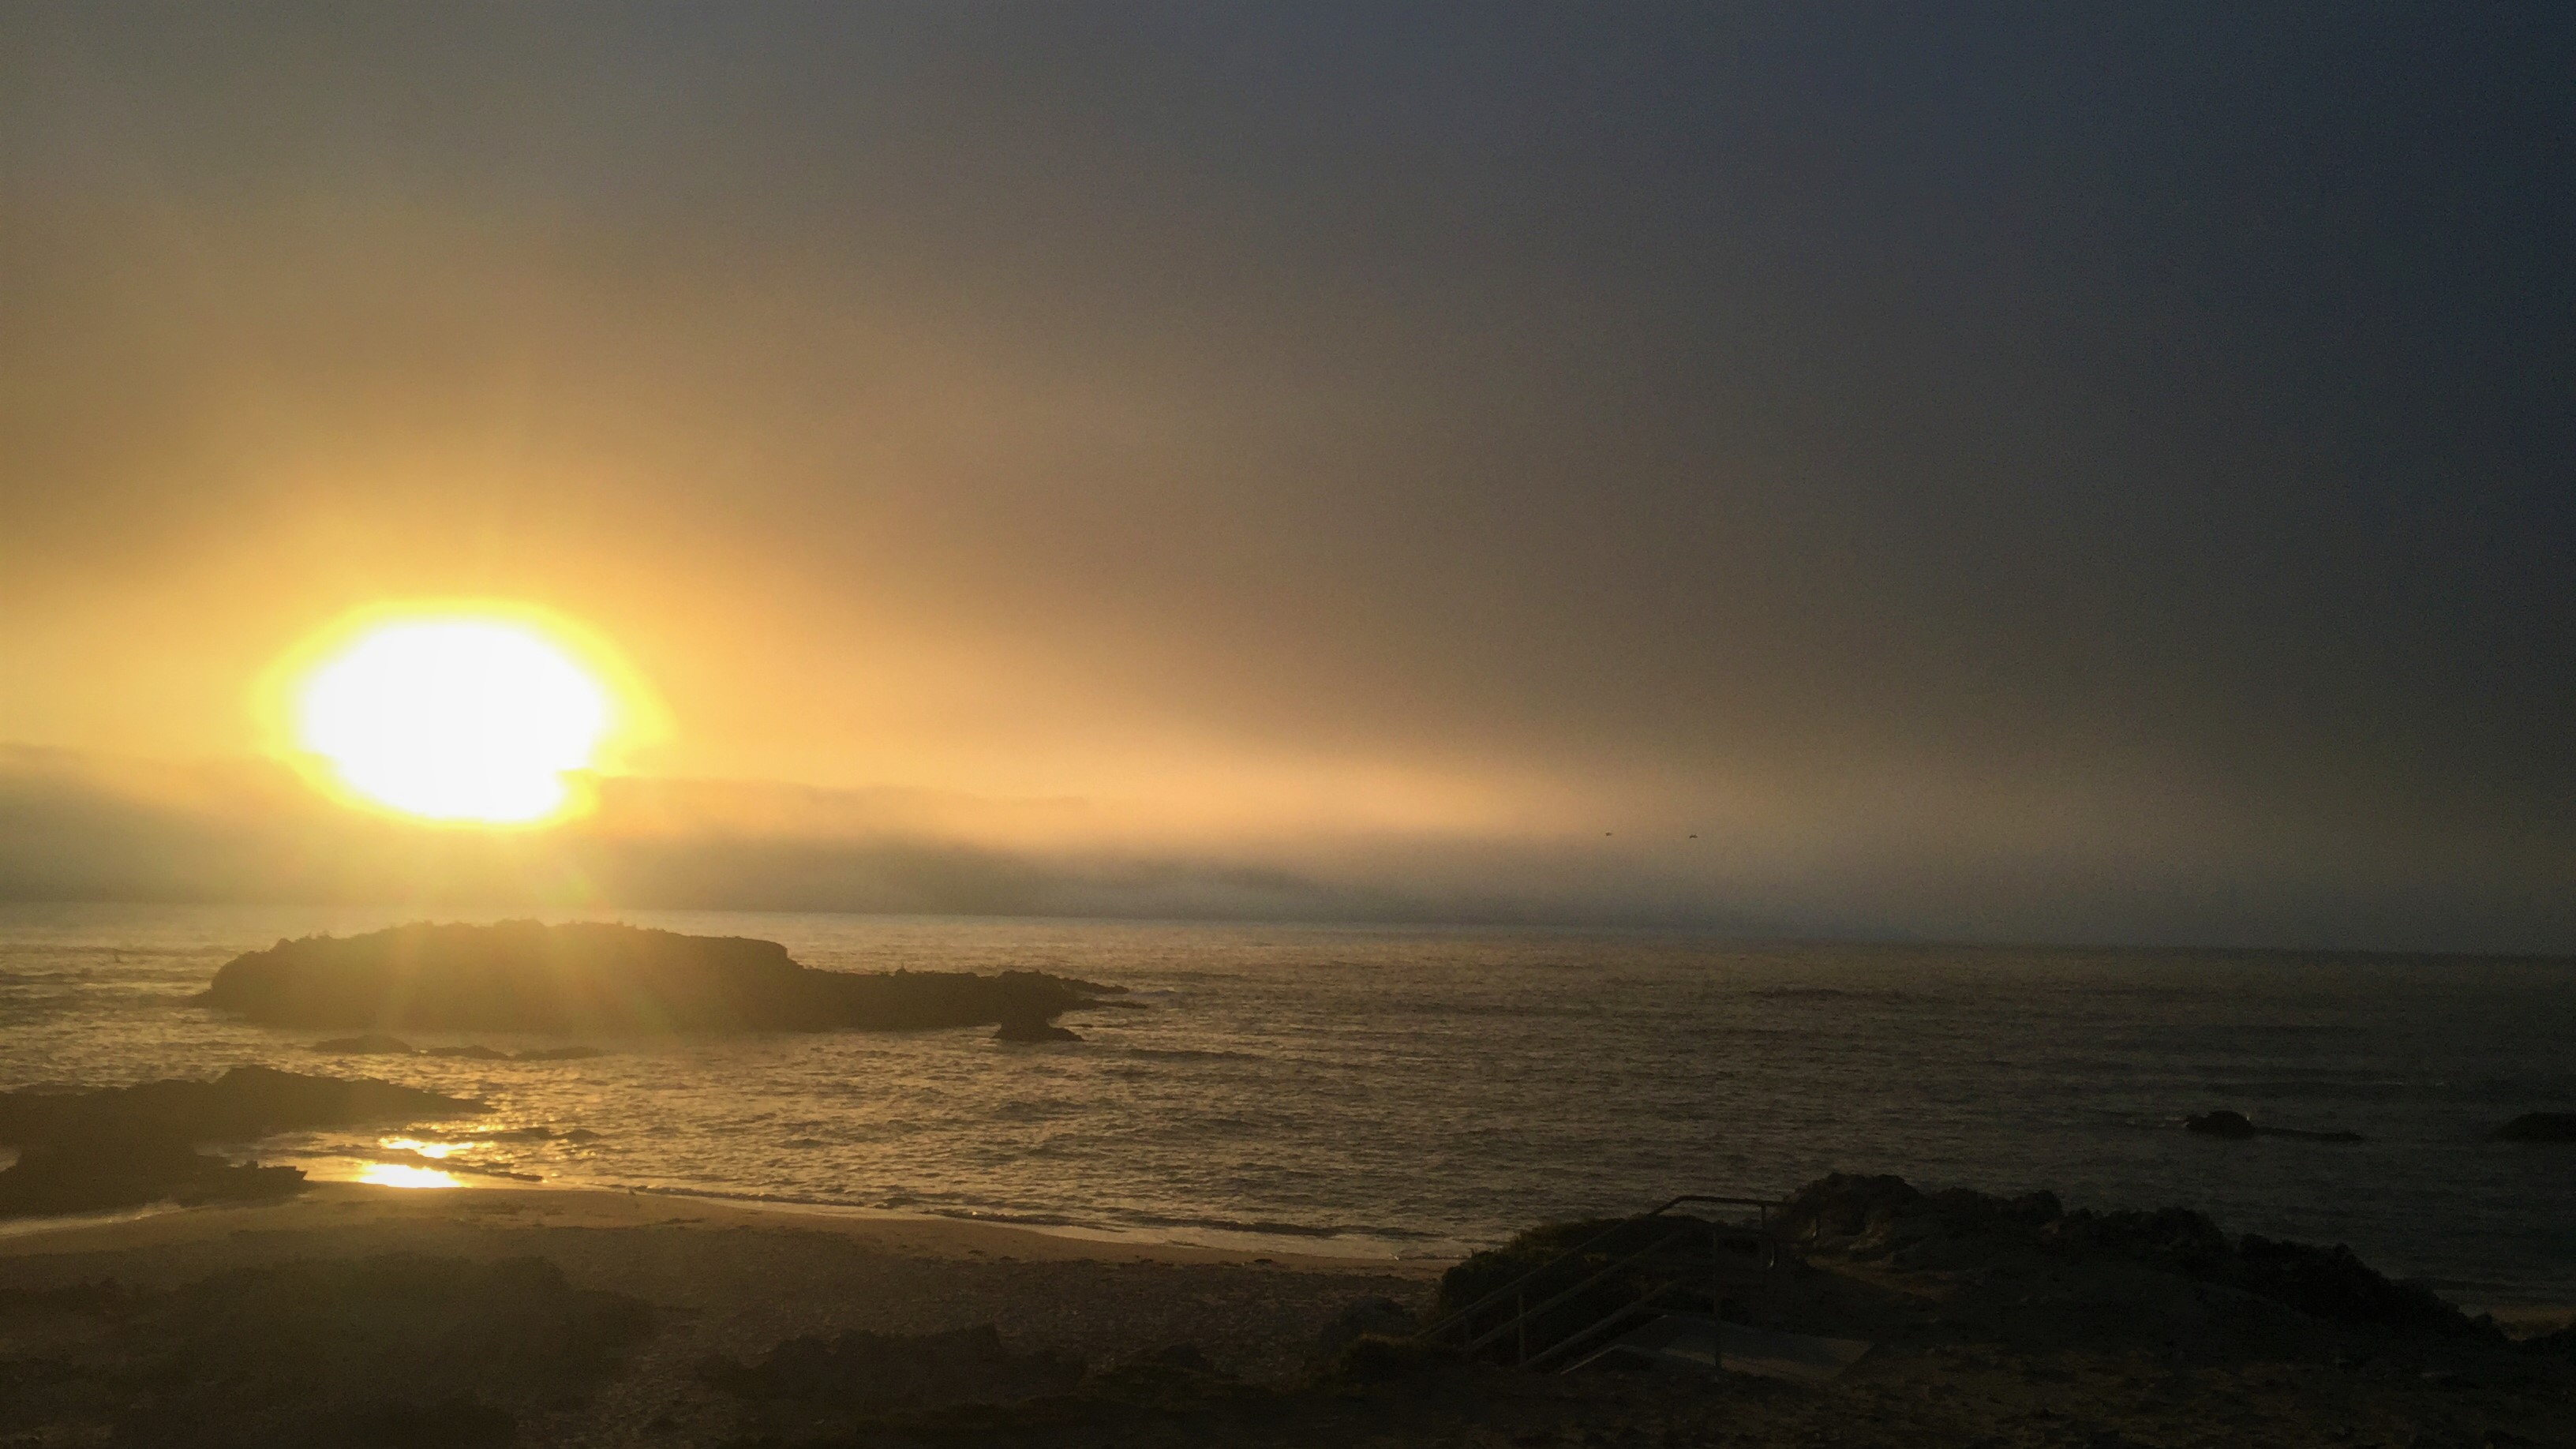 Sunset over Pescadero Beach, California as the fog rolls in. By R.A.Myers.